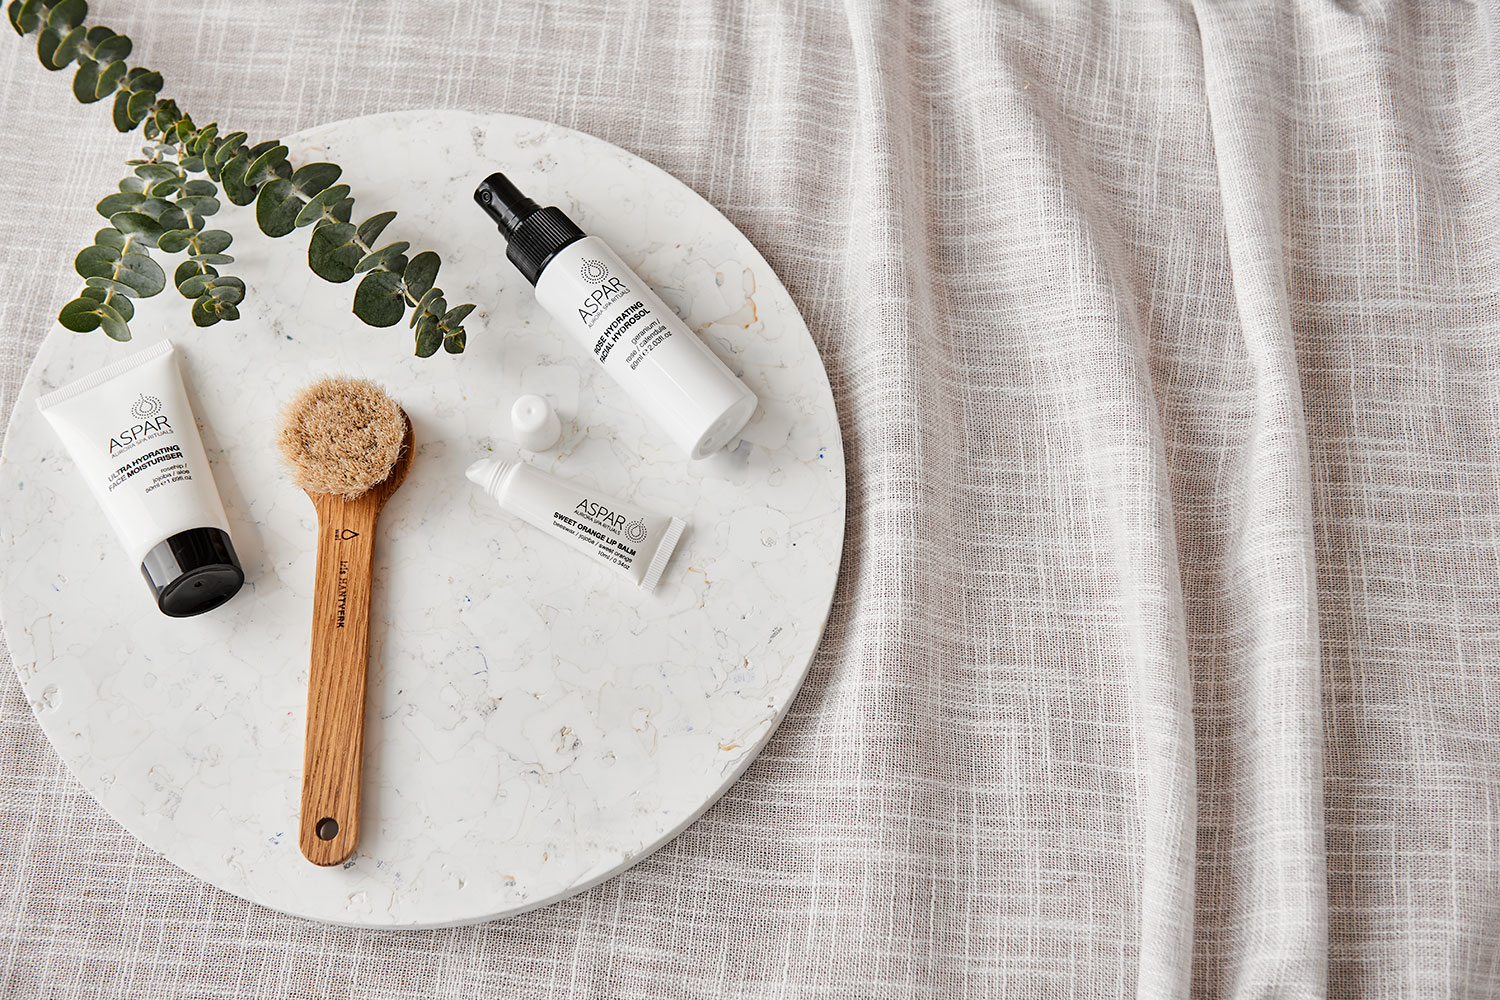 The perfect at-home facial treatment